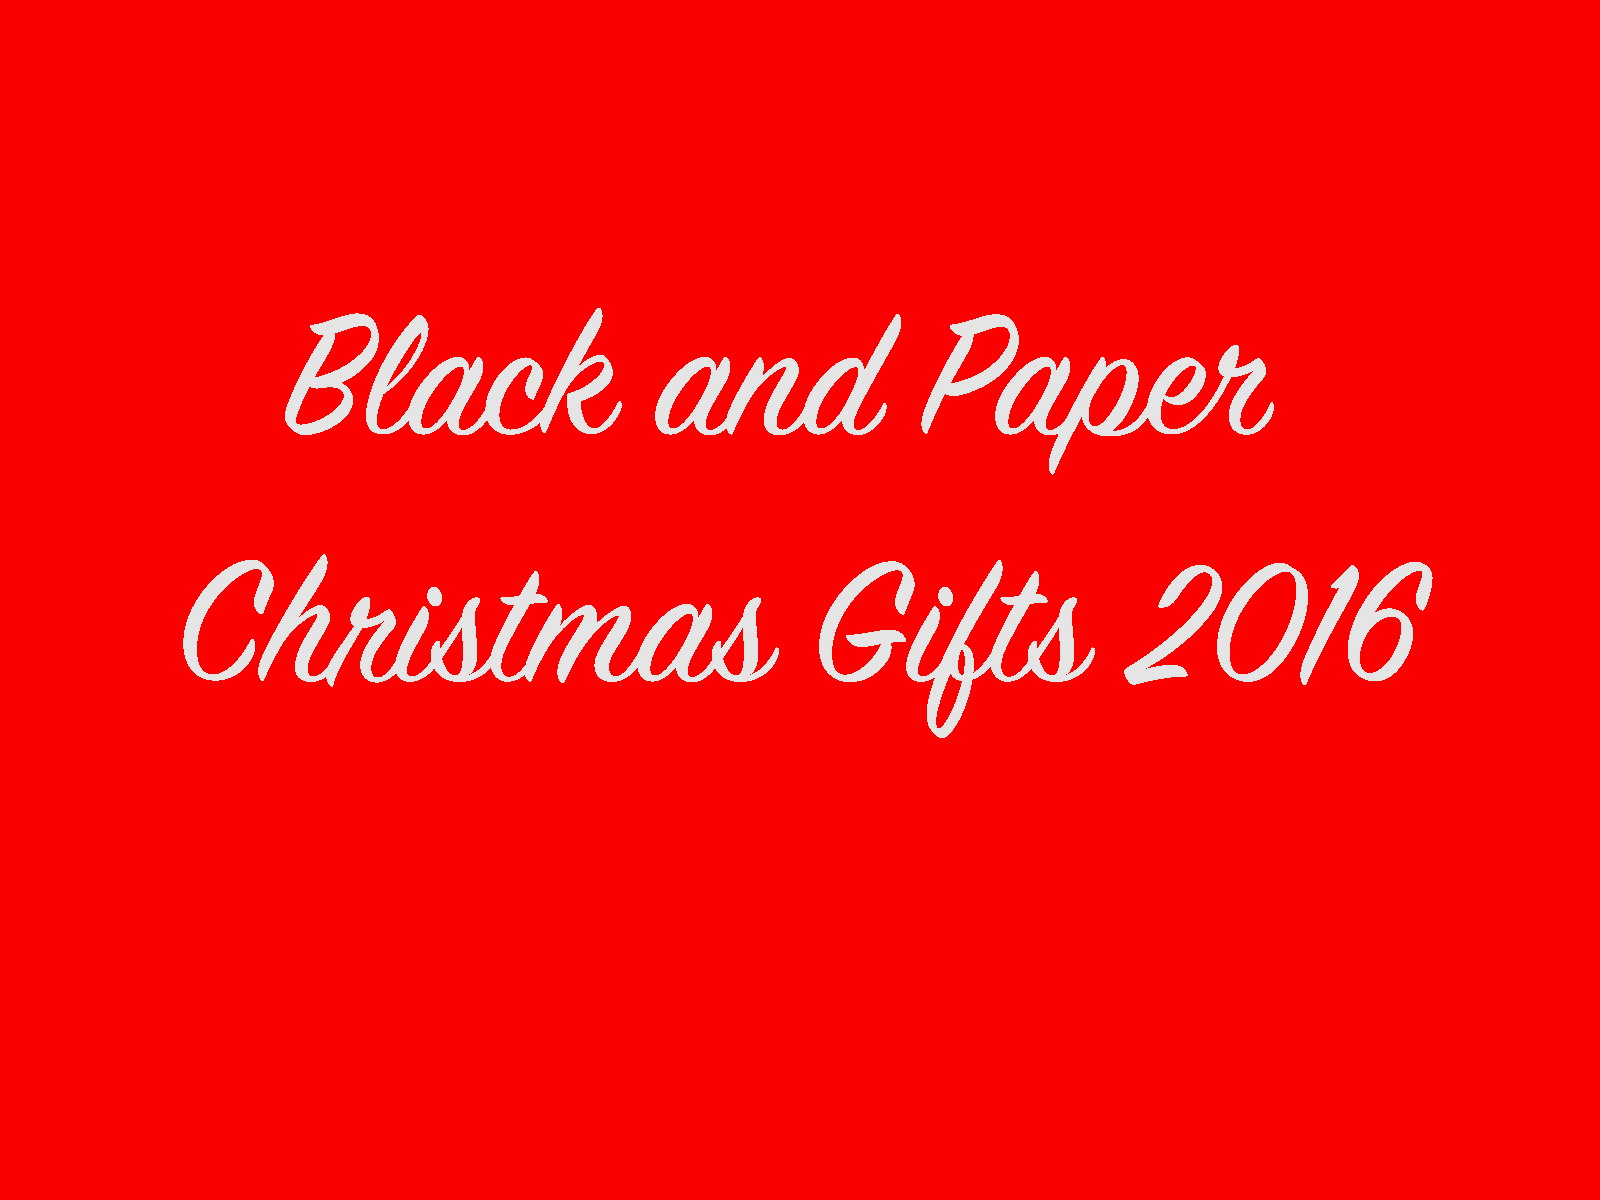 Black and Paper Christmas List Piper-Heidsieck